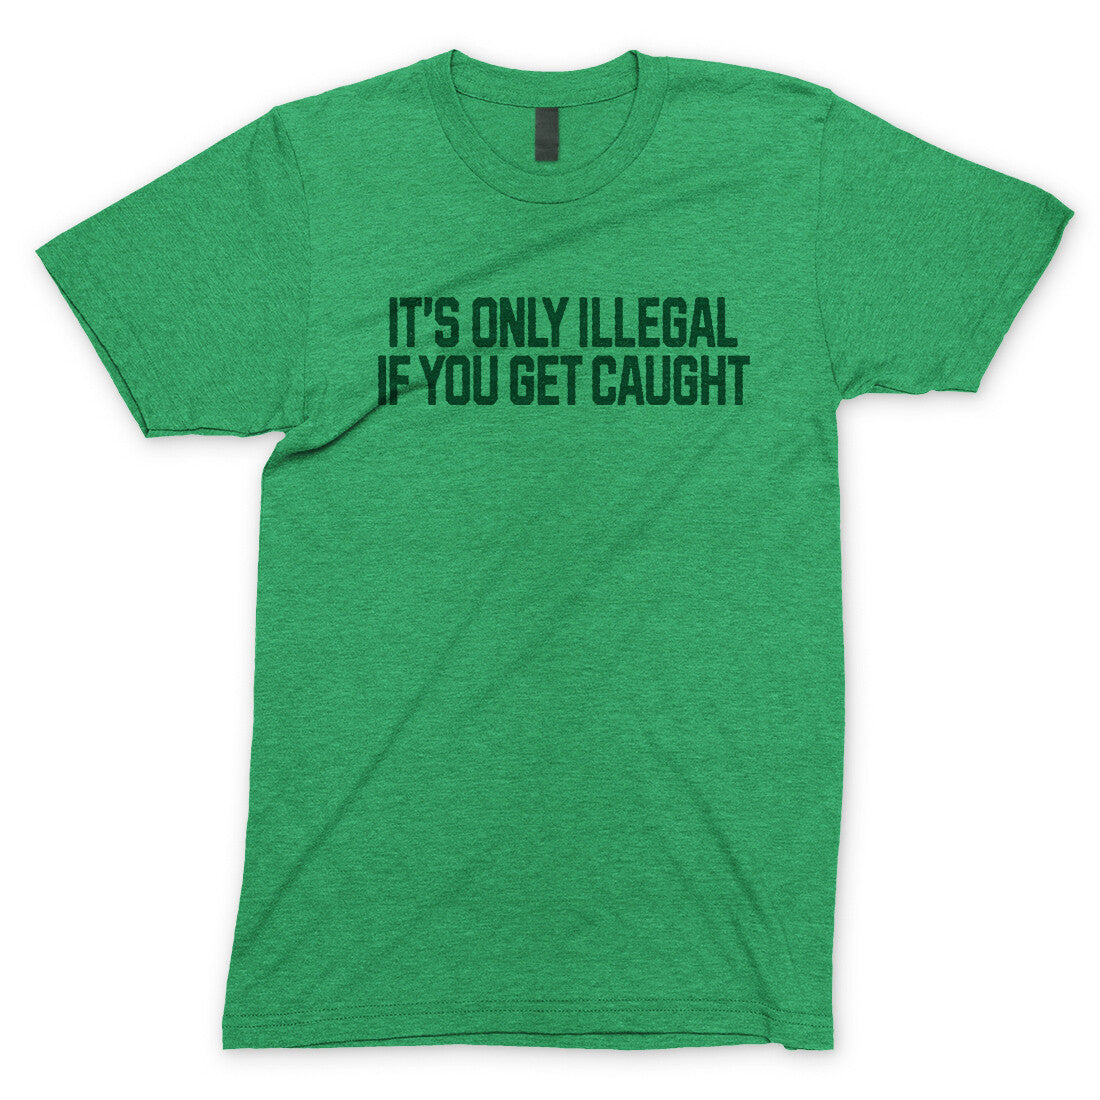 It’s Only Illegal If You Get Caught in Heather Irish Green Color